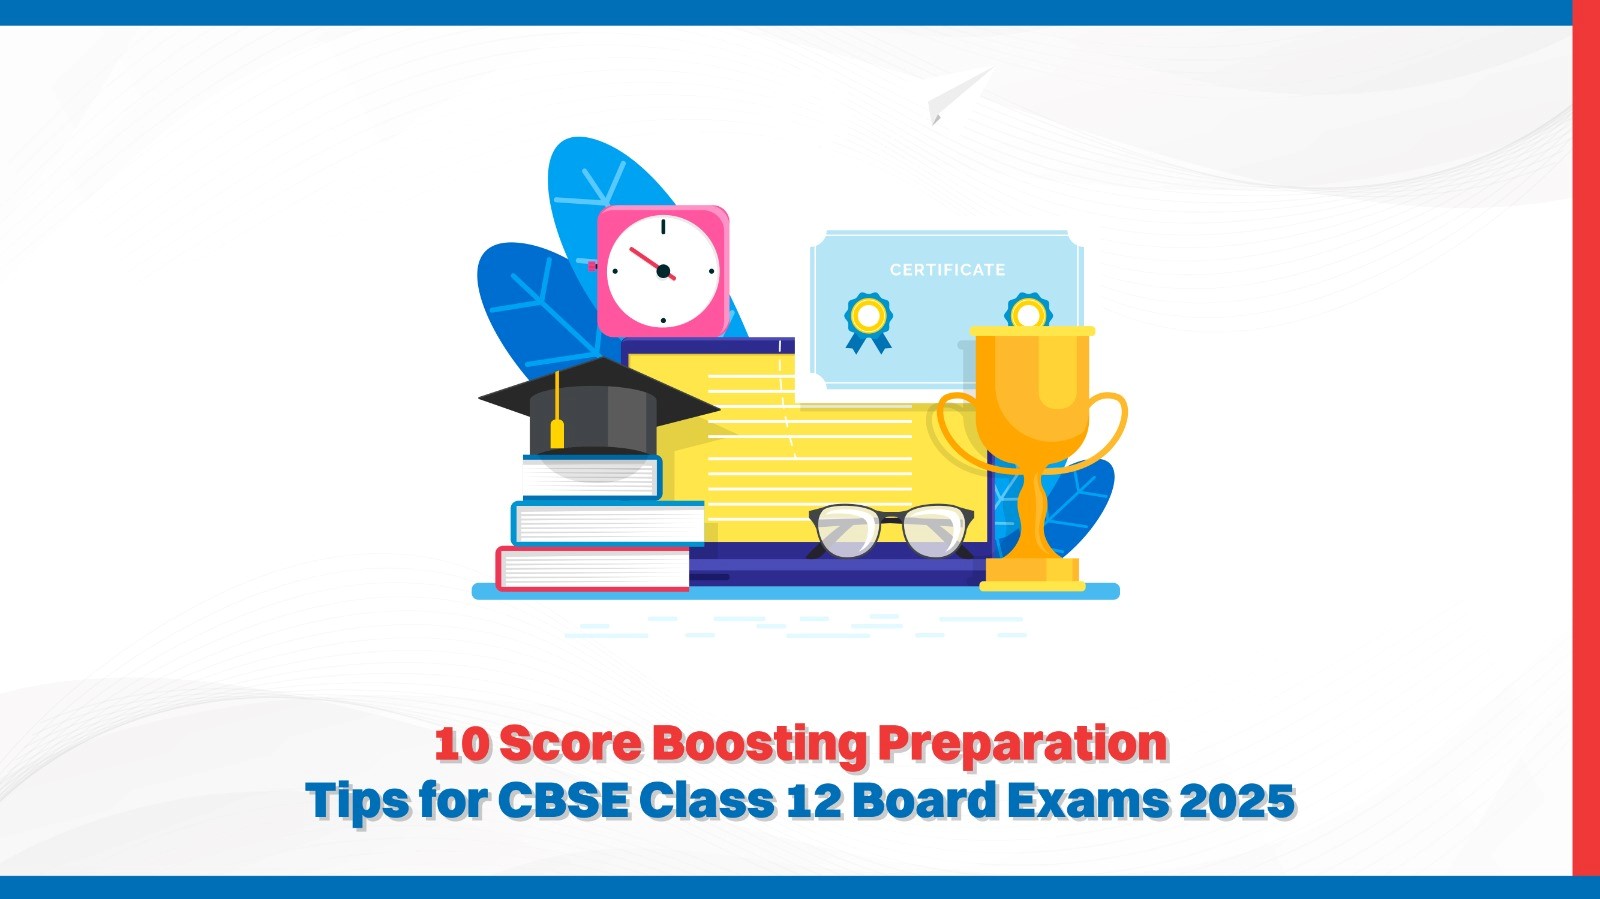 10 Score Boosting Preparation Tips for CBSE Class 12 Board Exams 2025